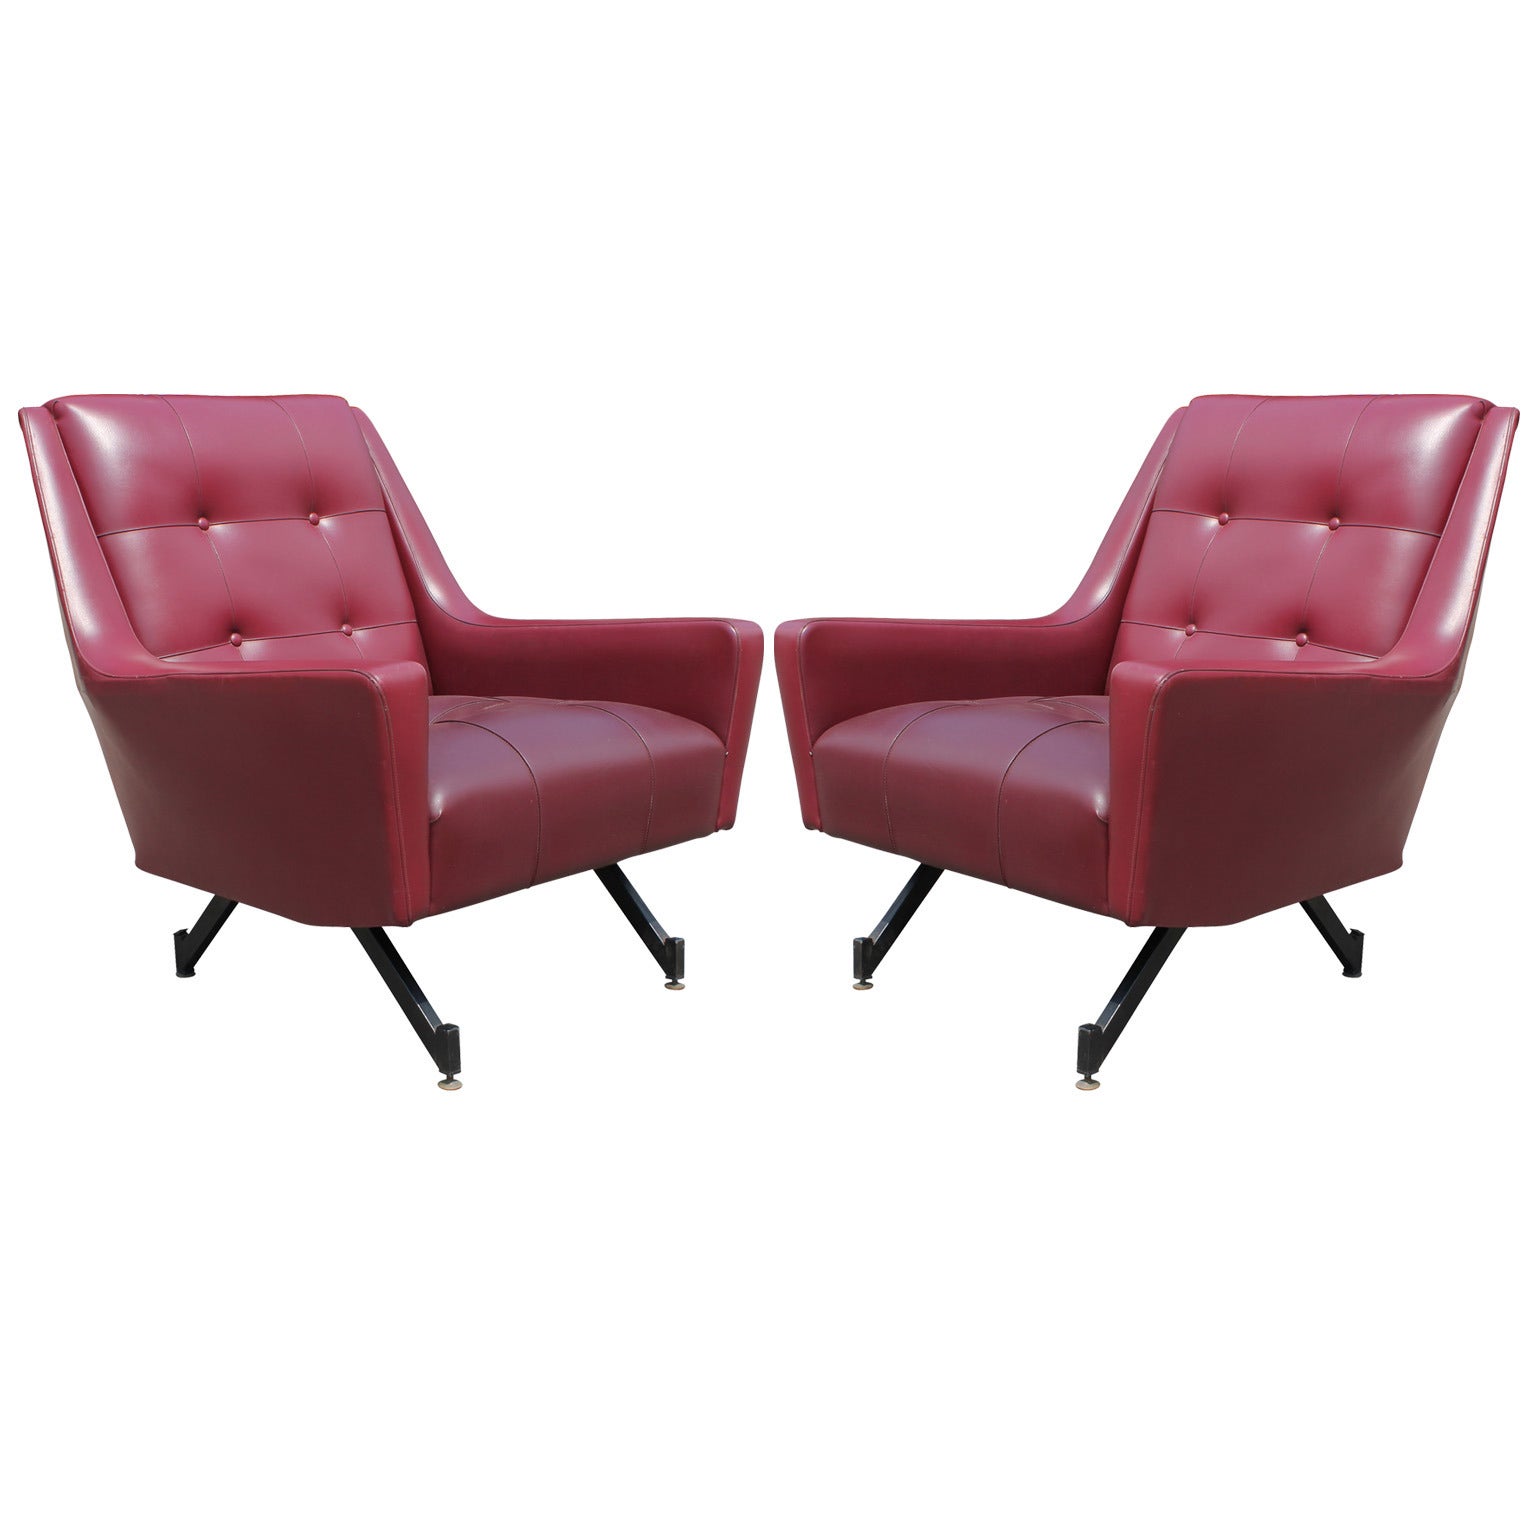 Pair of Mid Century Modern Italian Refd Leather Tufted Lounge Chairs